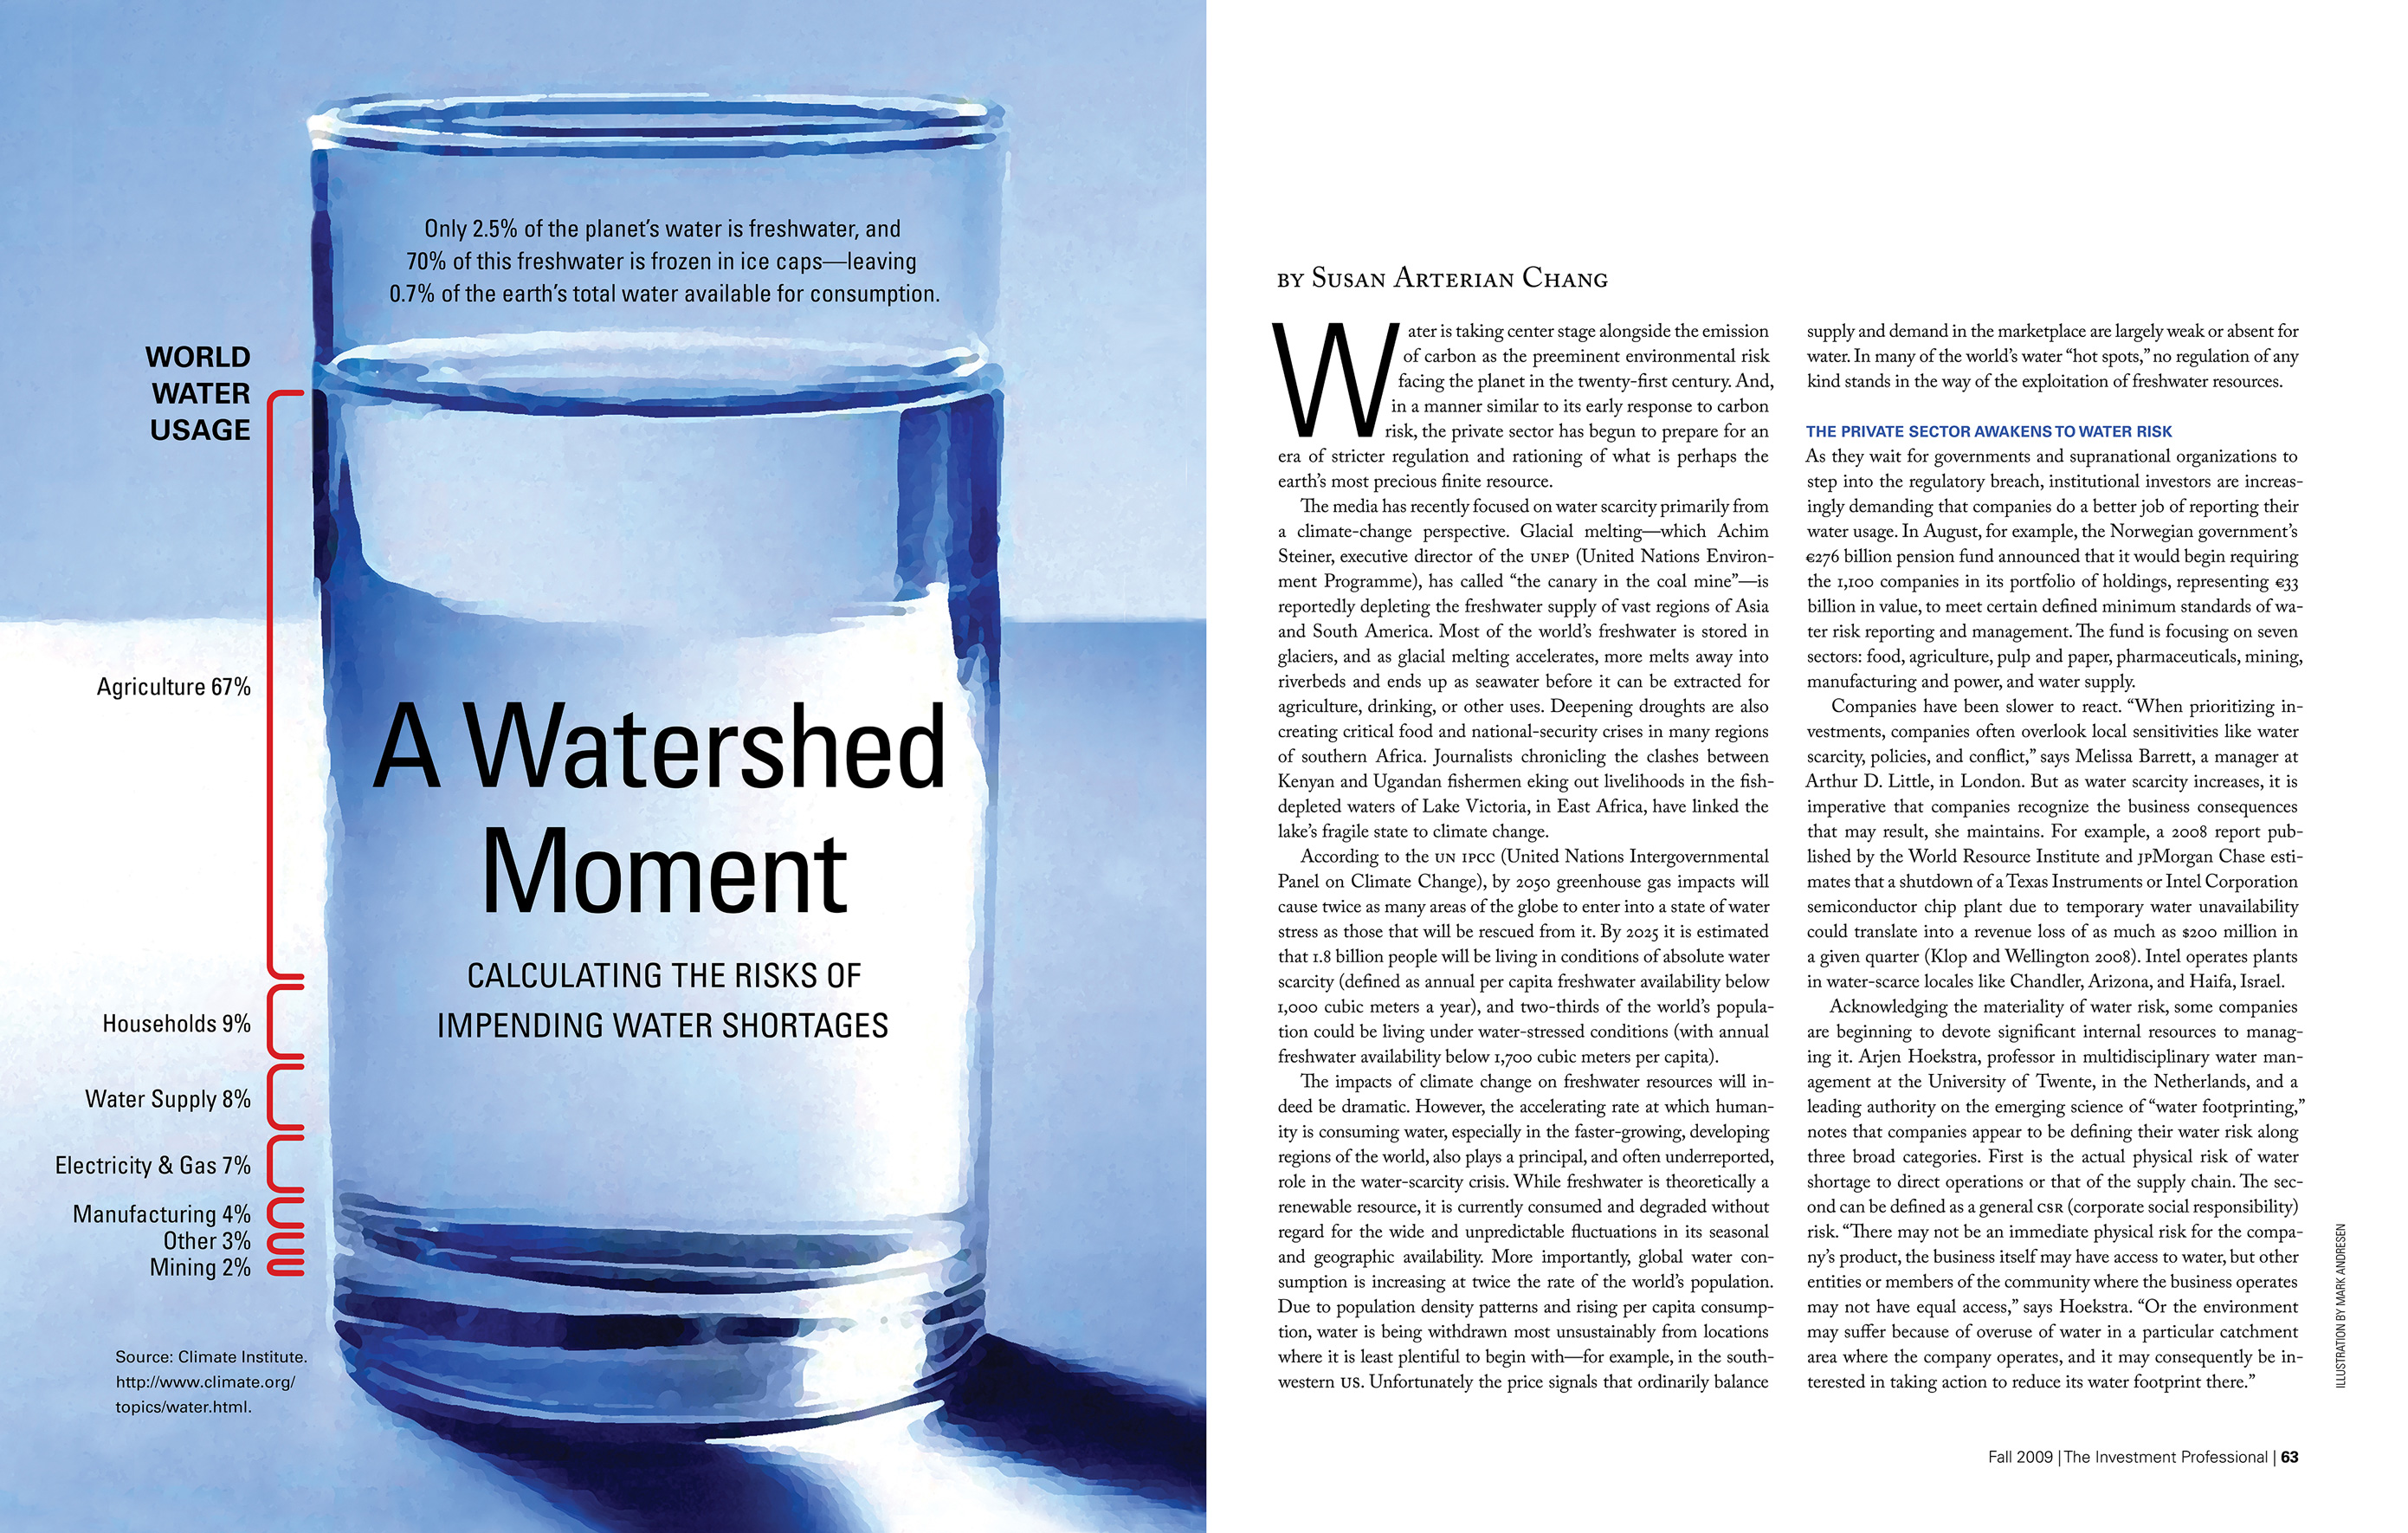 Opening spread of a feature article in The Investment Professional magazine, titled 'A Watershed Moment: Calculating the Risks of Impending Water Shortages.' A full-page illustration of a water glass in blue tones serves as a backdrop for an infographic on percentages of world water usage by industry.